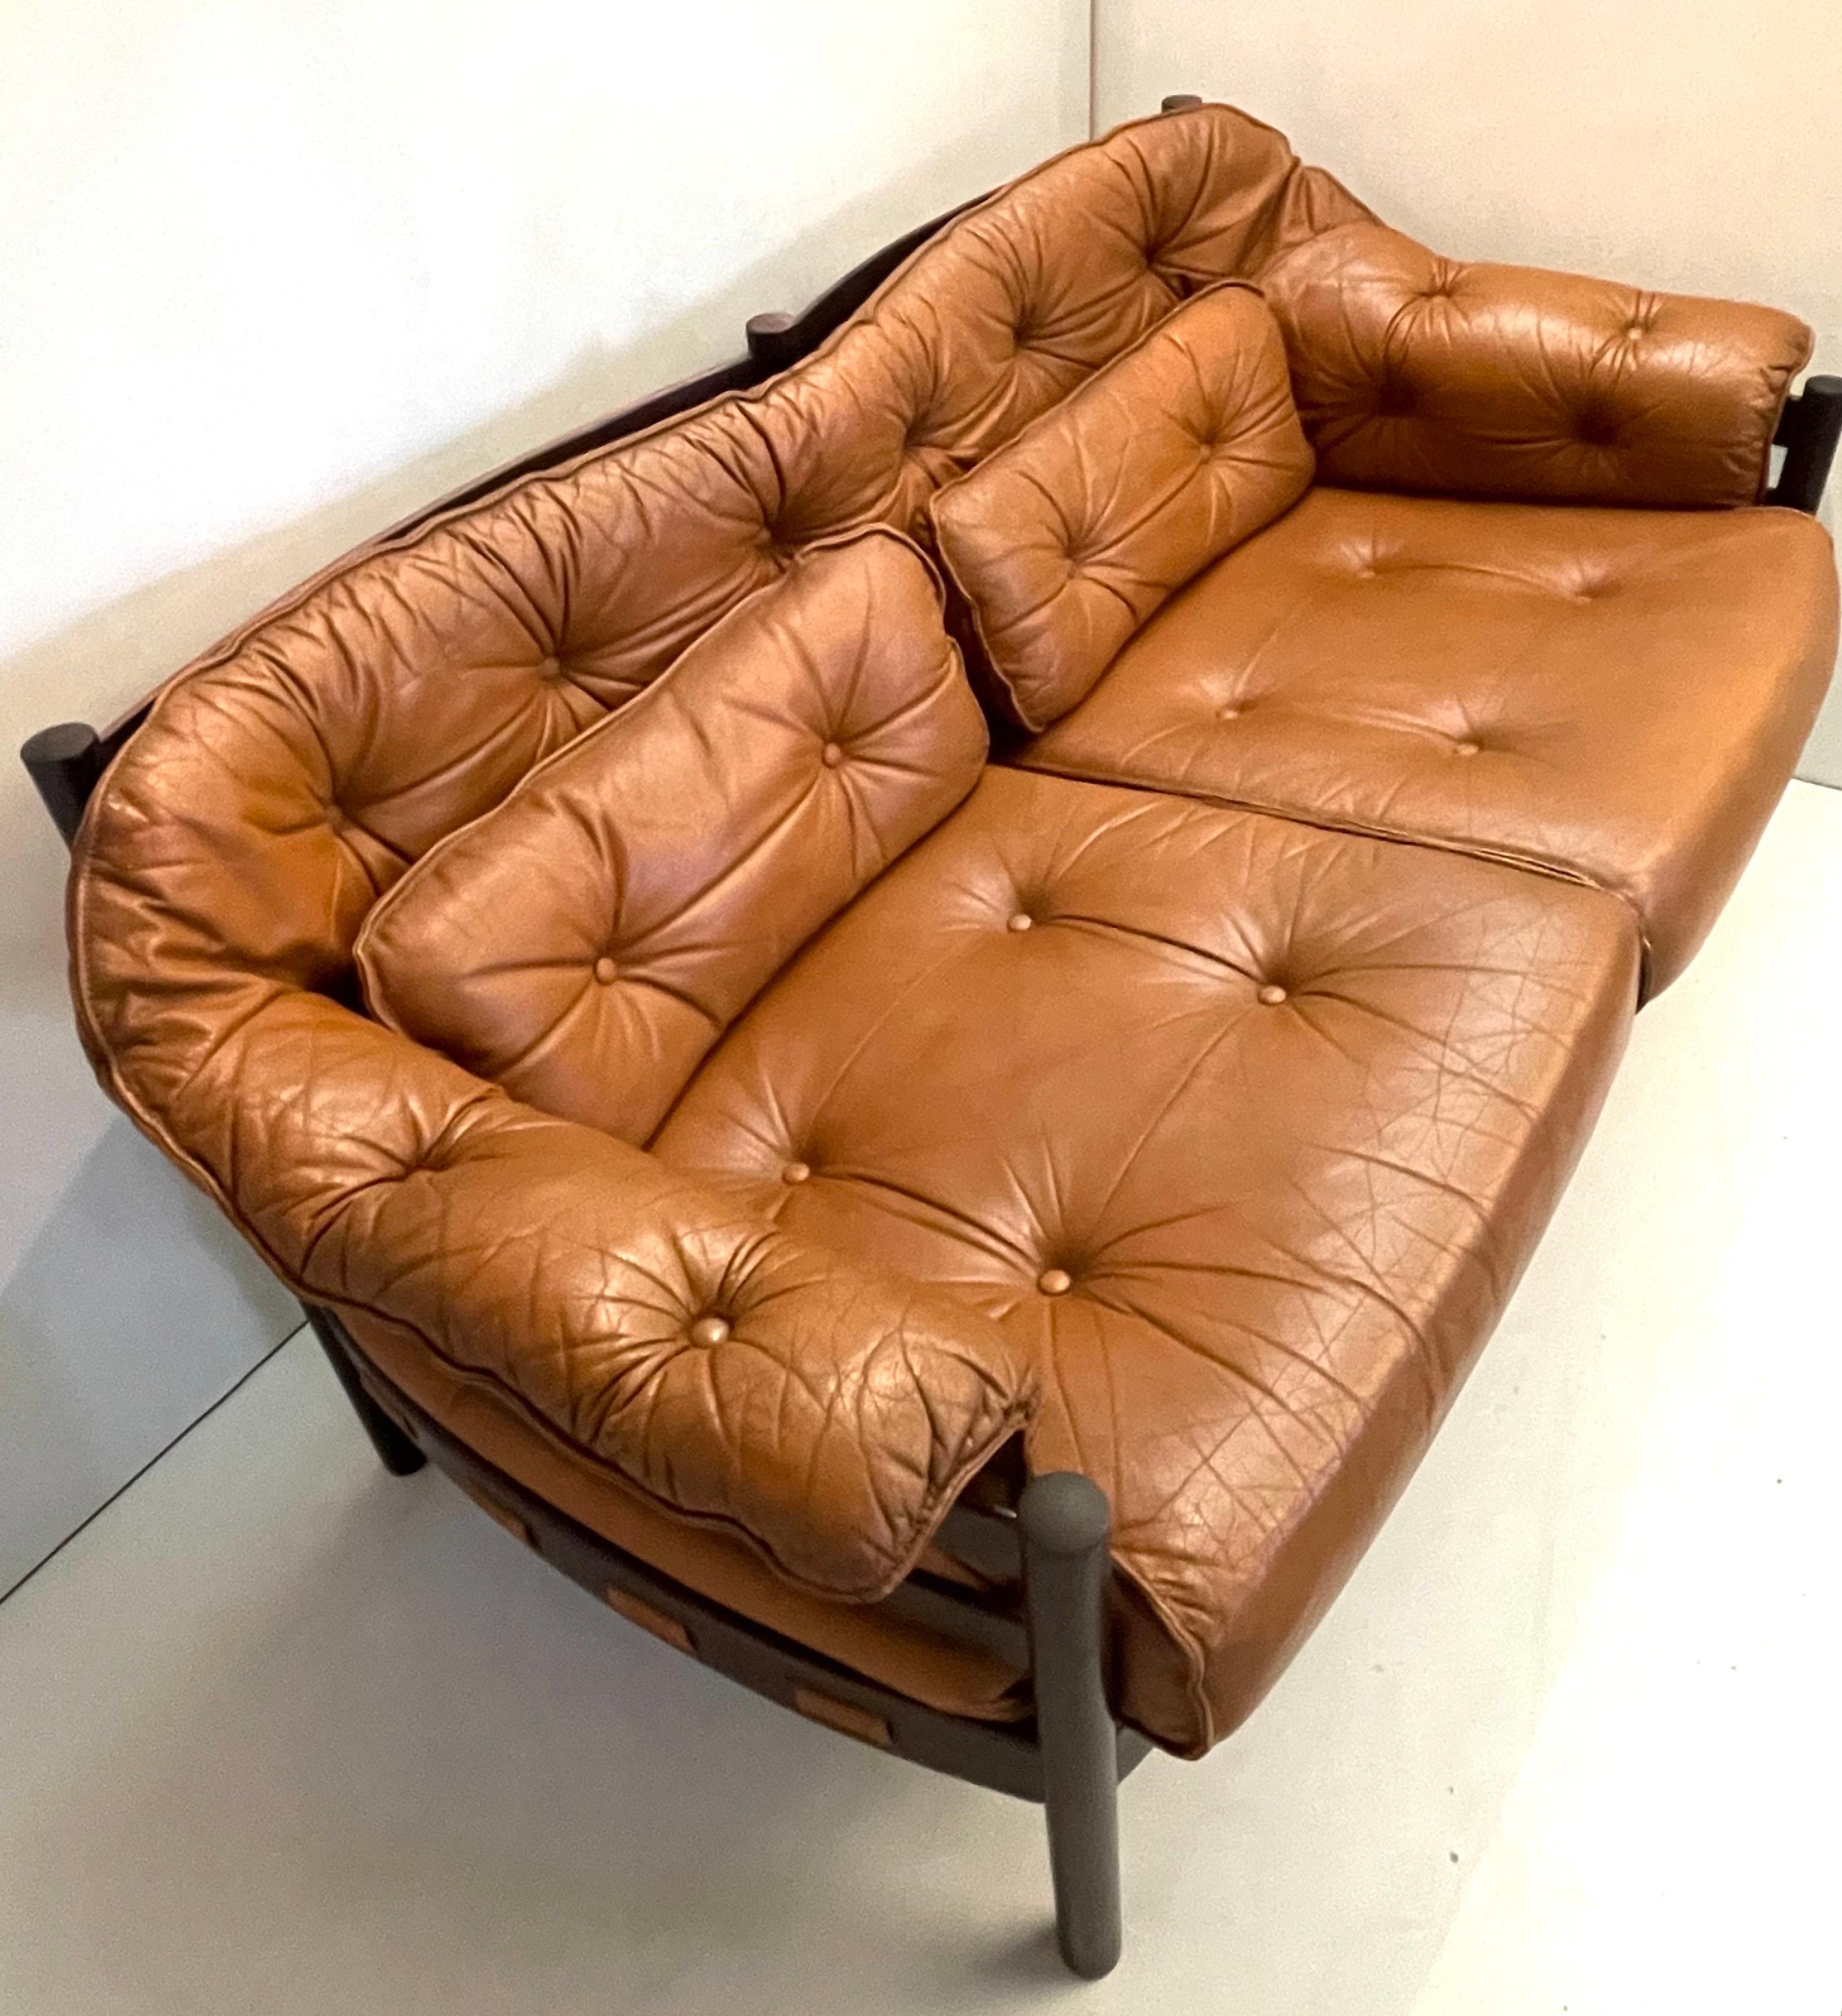 Mid-Century Modern Sven Ellekaer for Coja Two-Seat Settee Sofa in soft Camel Leather For Sale